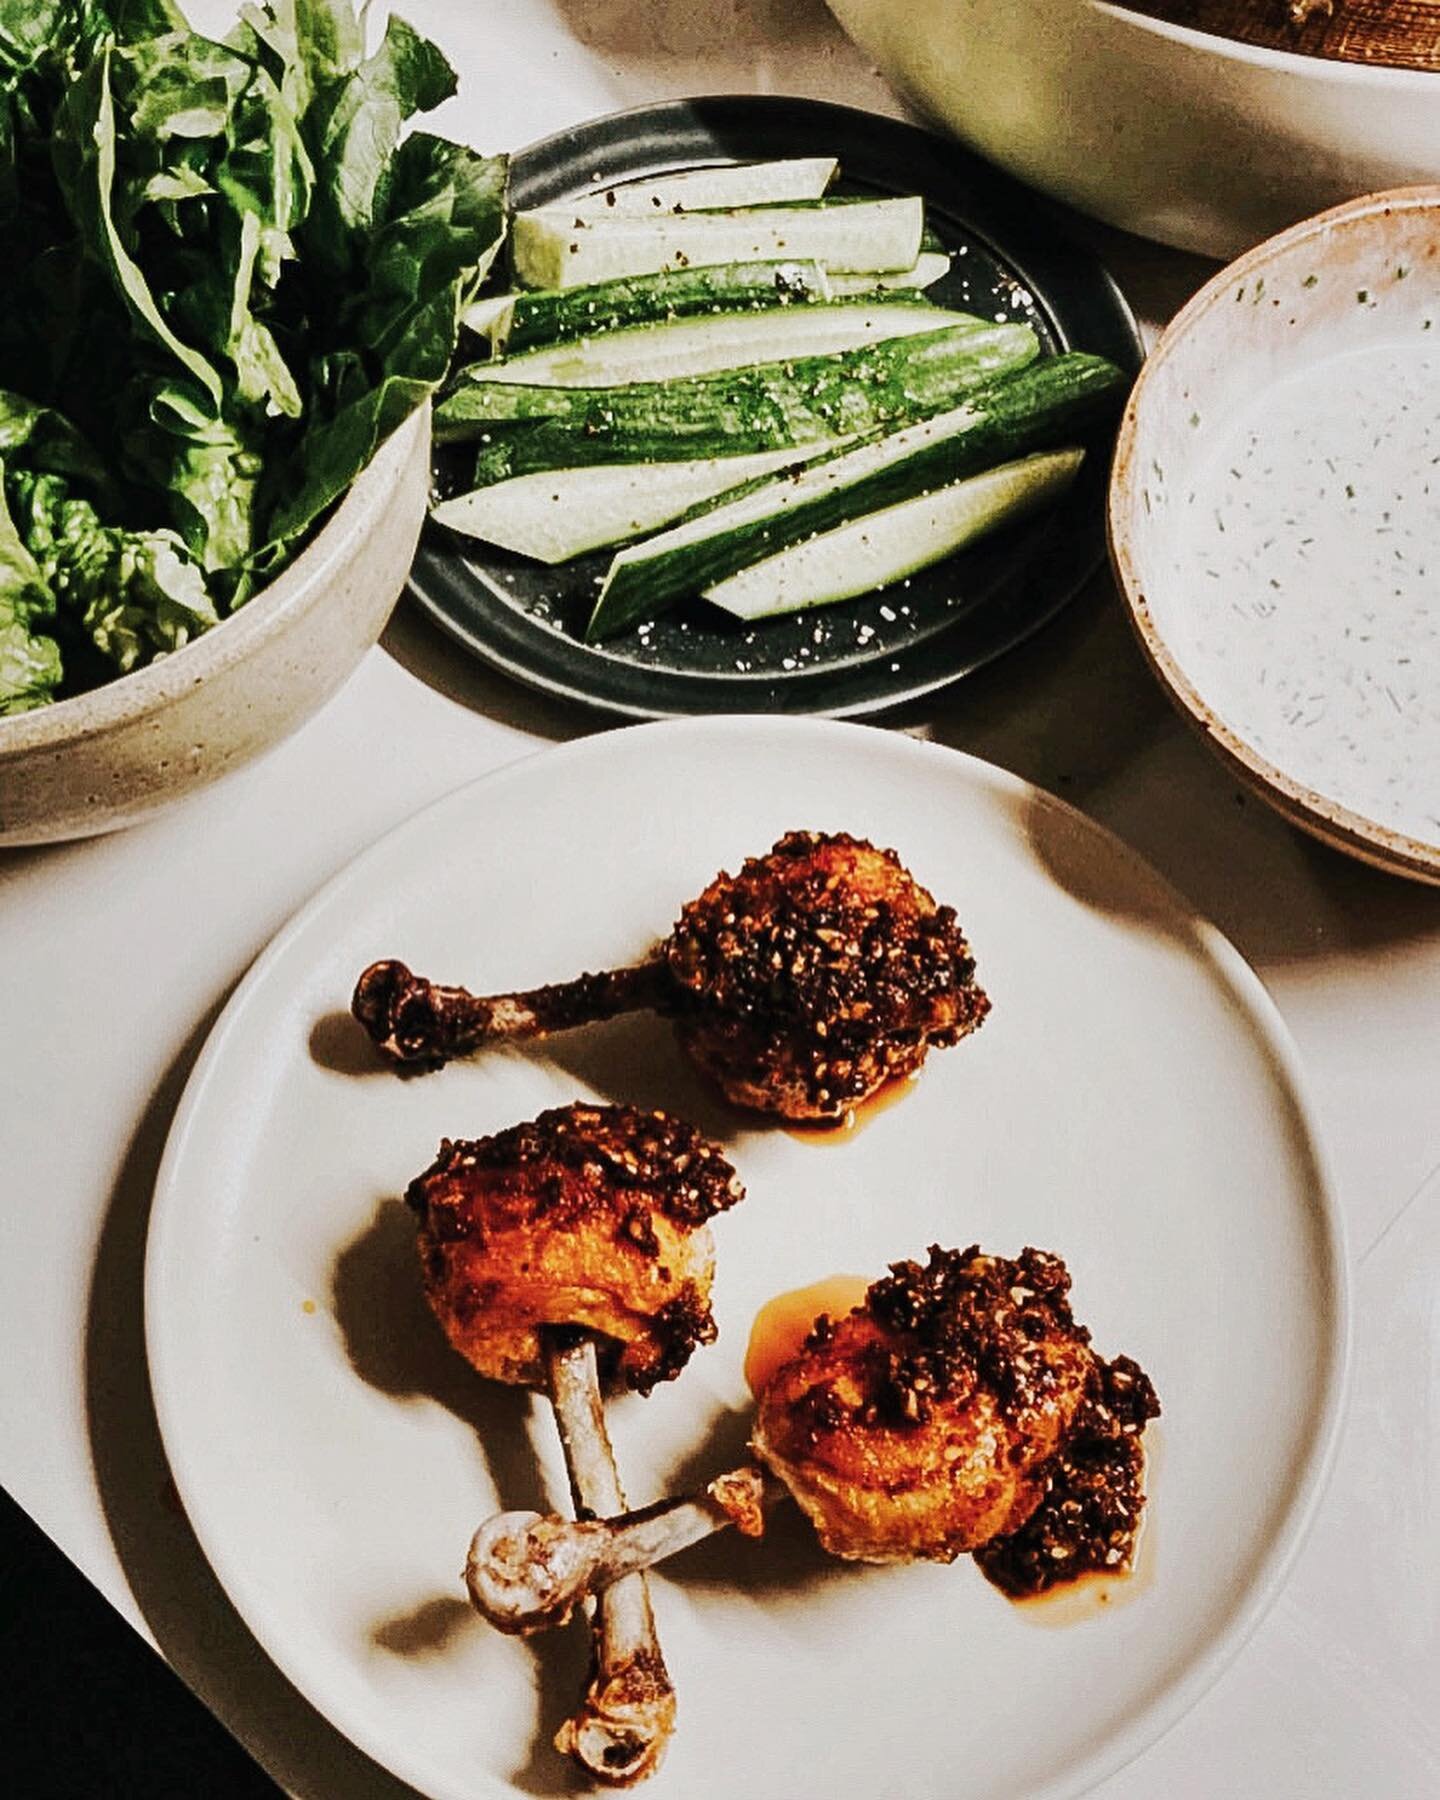 SALSA MACHA CHICKEN WINGS + GARLIC CHIVE RANCH | it&rsquo;s no secret I have a deep love for salsa macha&hellip;. I also have a deep love for these frenched style chicken drumsticks, and for homemade ranch dressing&hellip;. so this is basically a lov